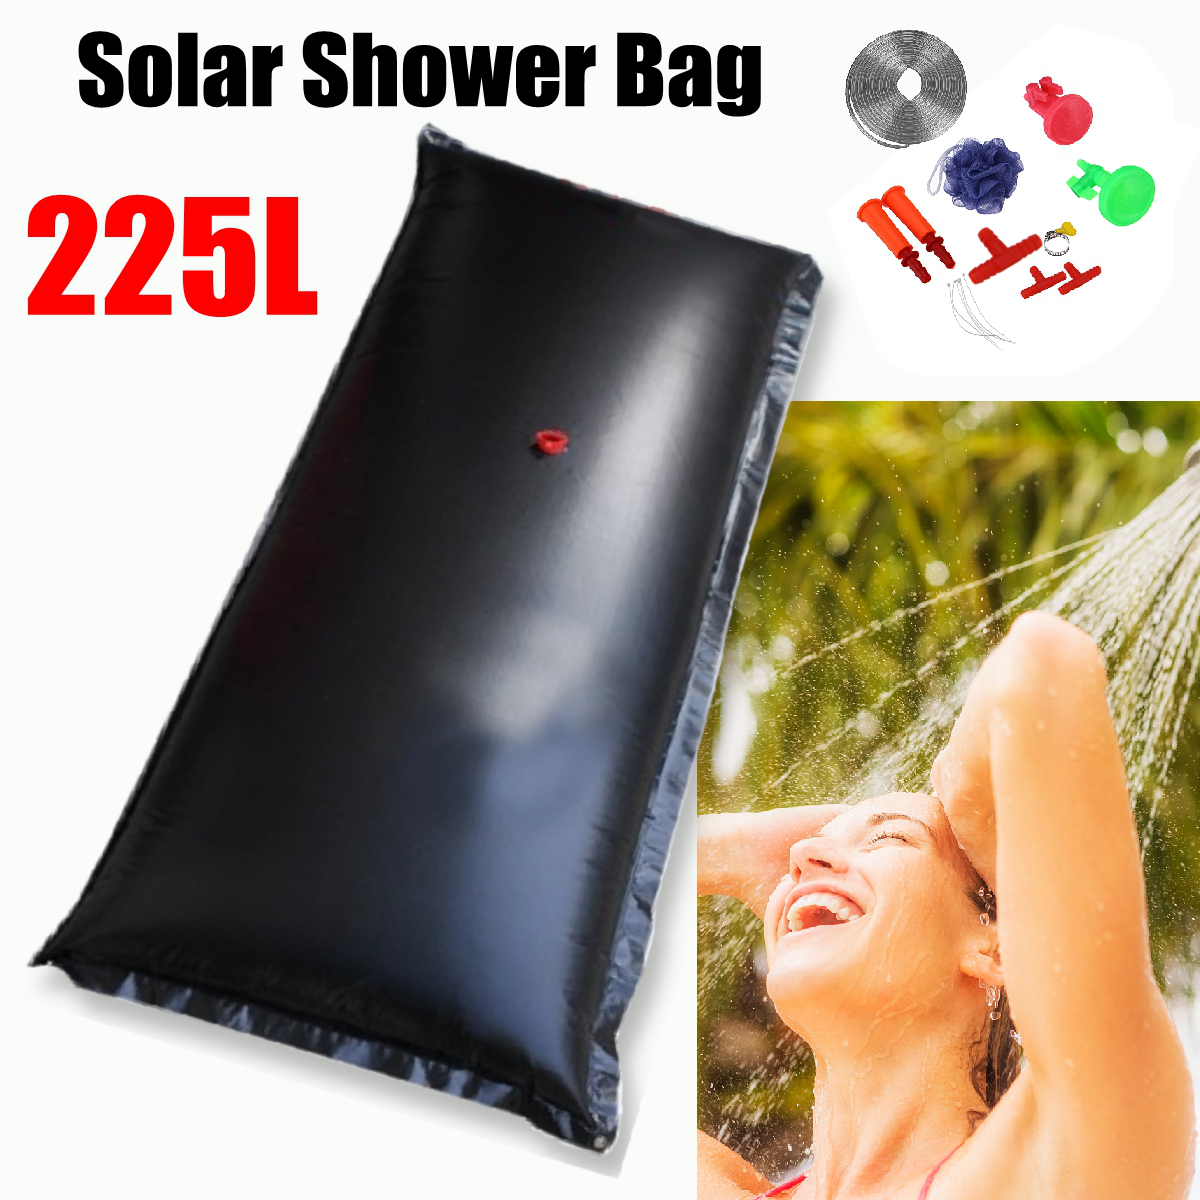 225L-Portable-Solar-Energy-Heated-Shower-Bathing-Bag-Outdoor-Camping-1553646-1